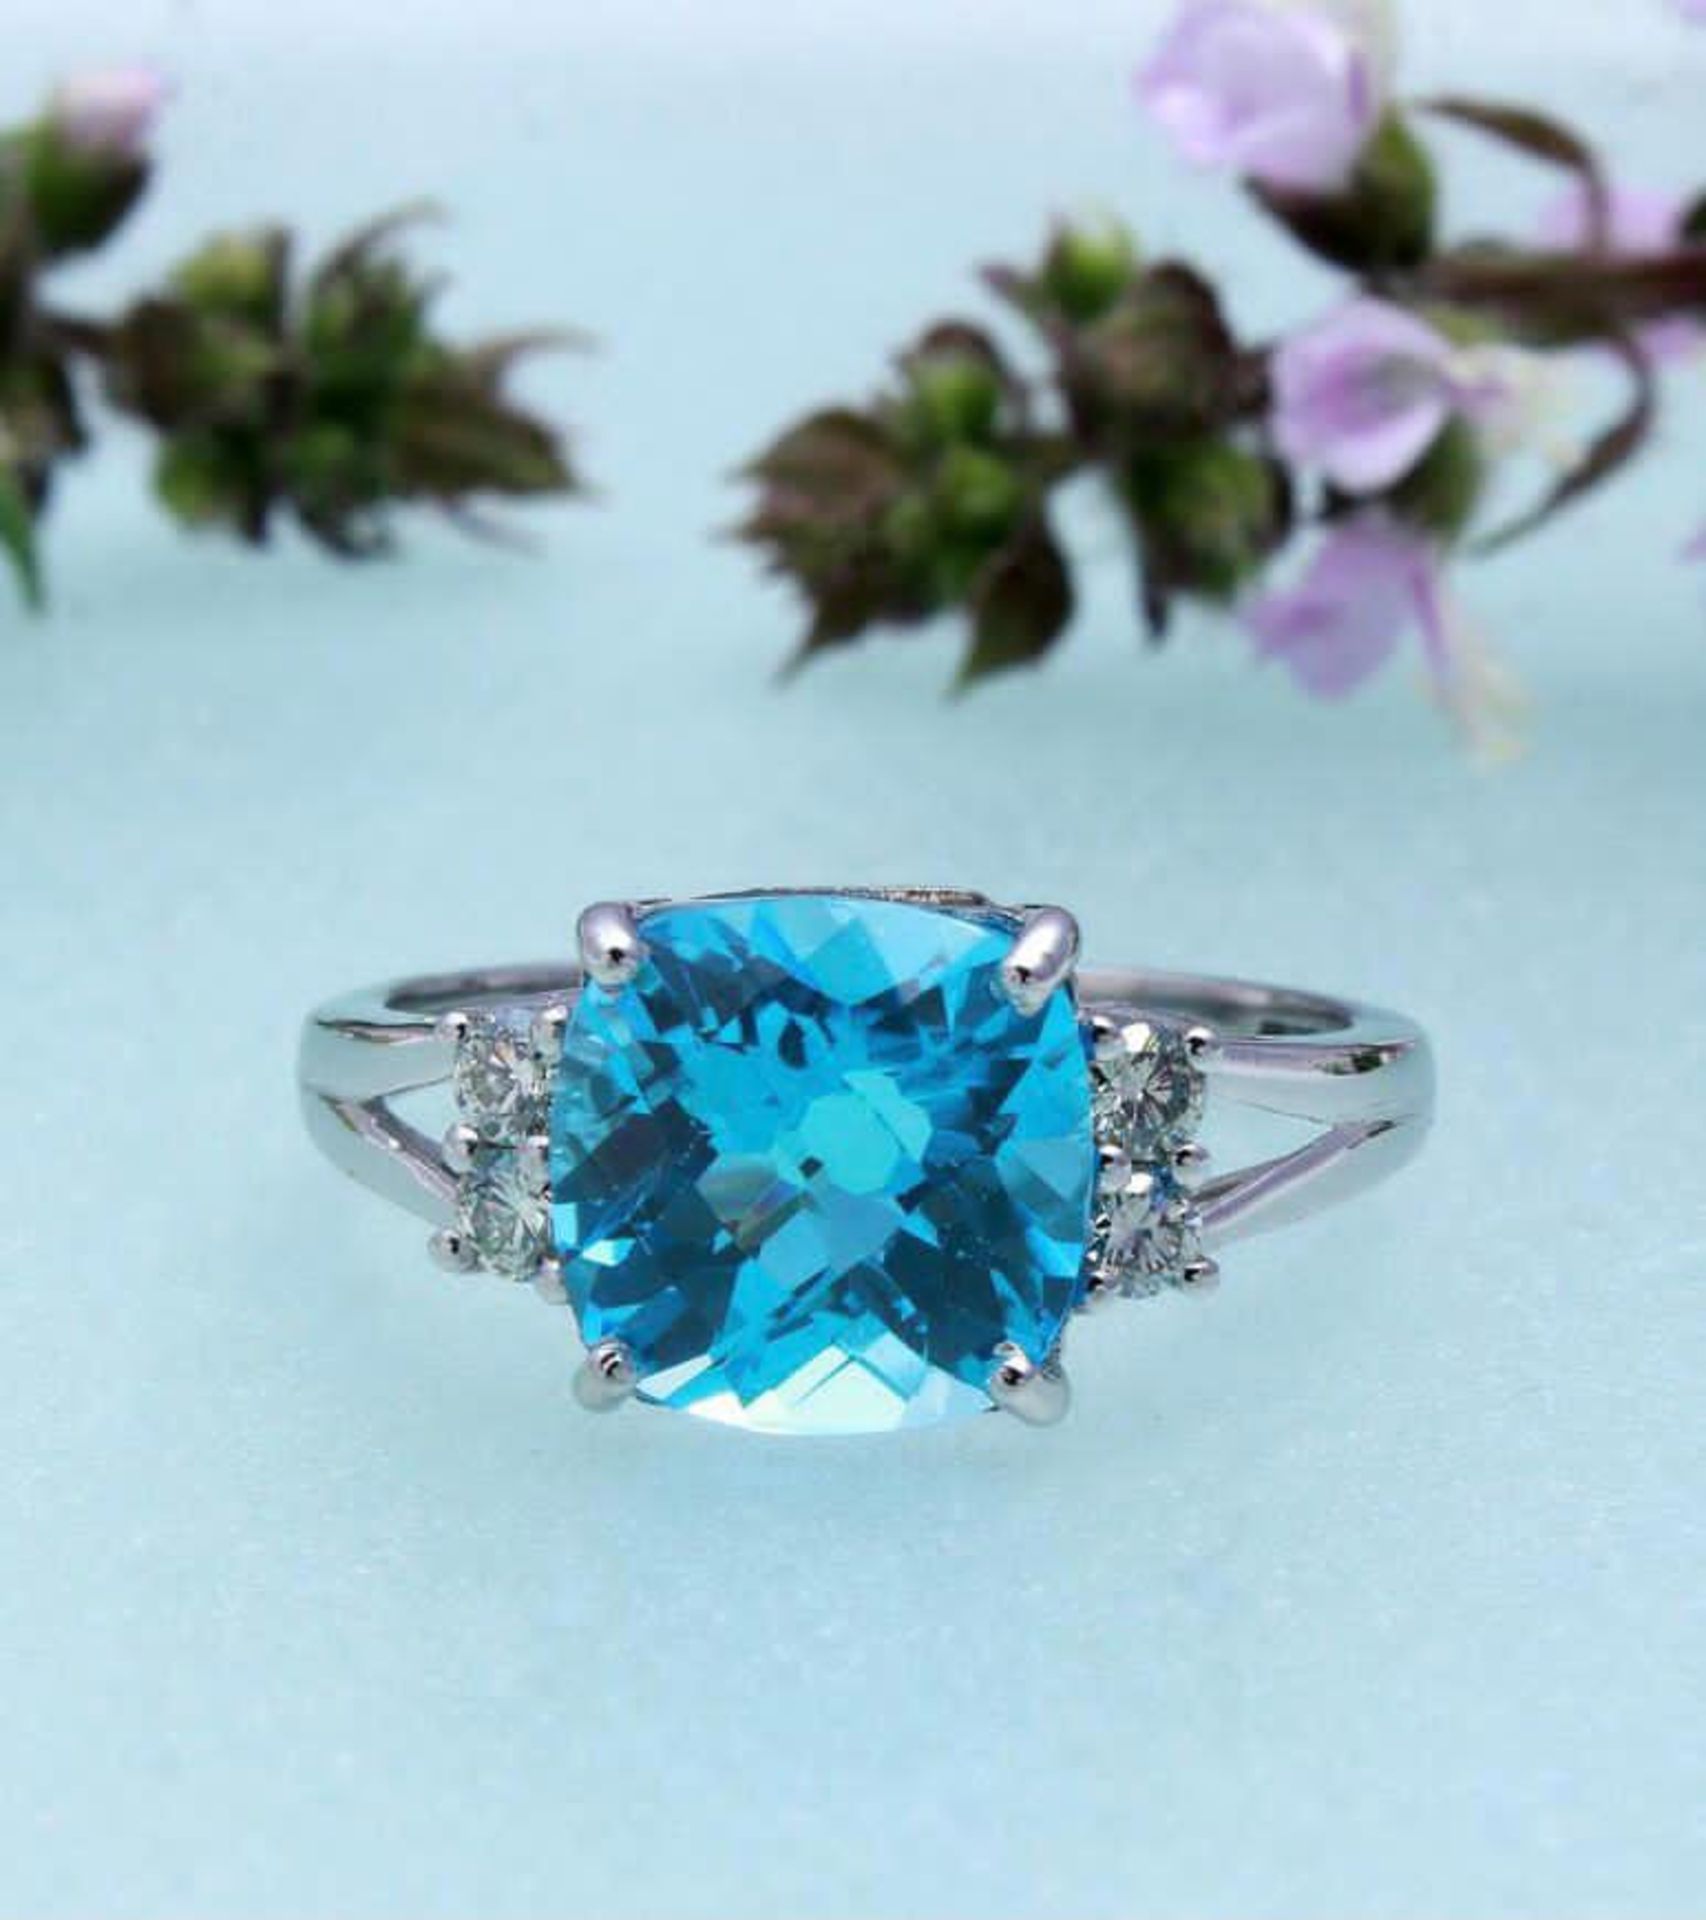 Beautiful Natural Blue Topaz Ring With Diamonds And 18k White Gold - Image 2 of 3